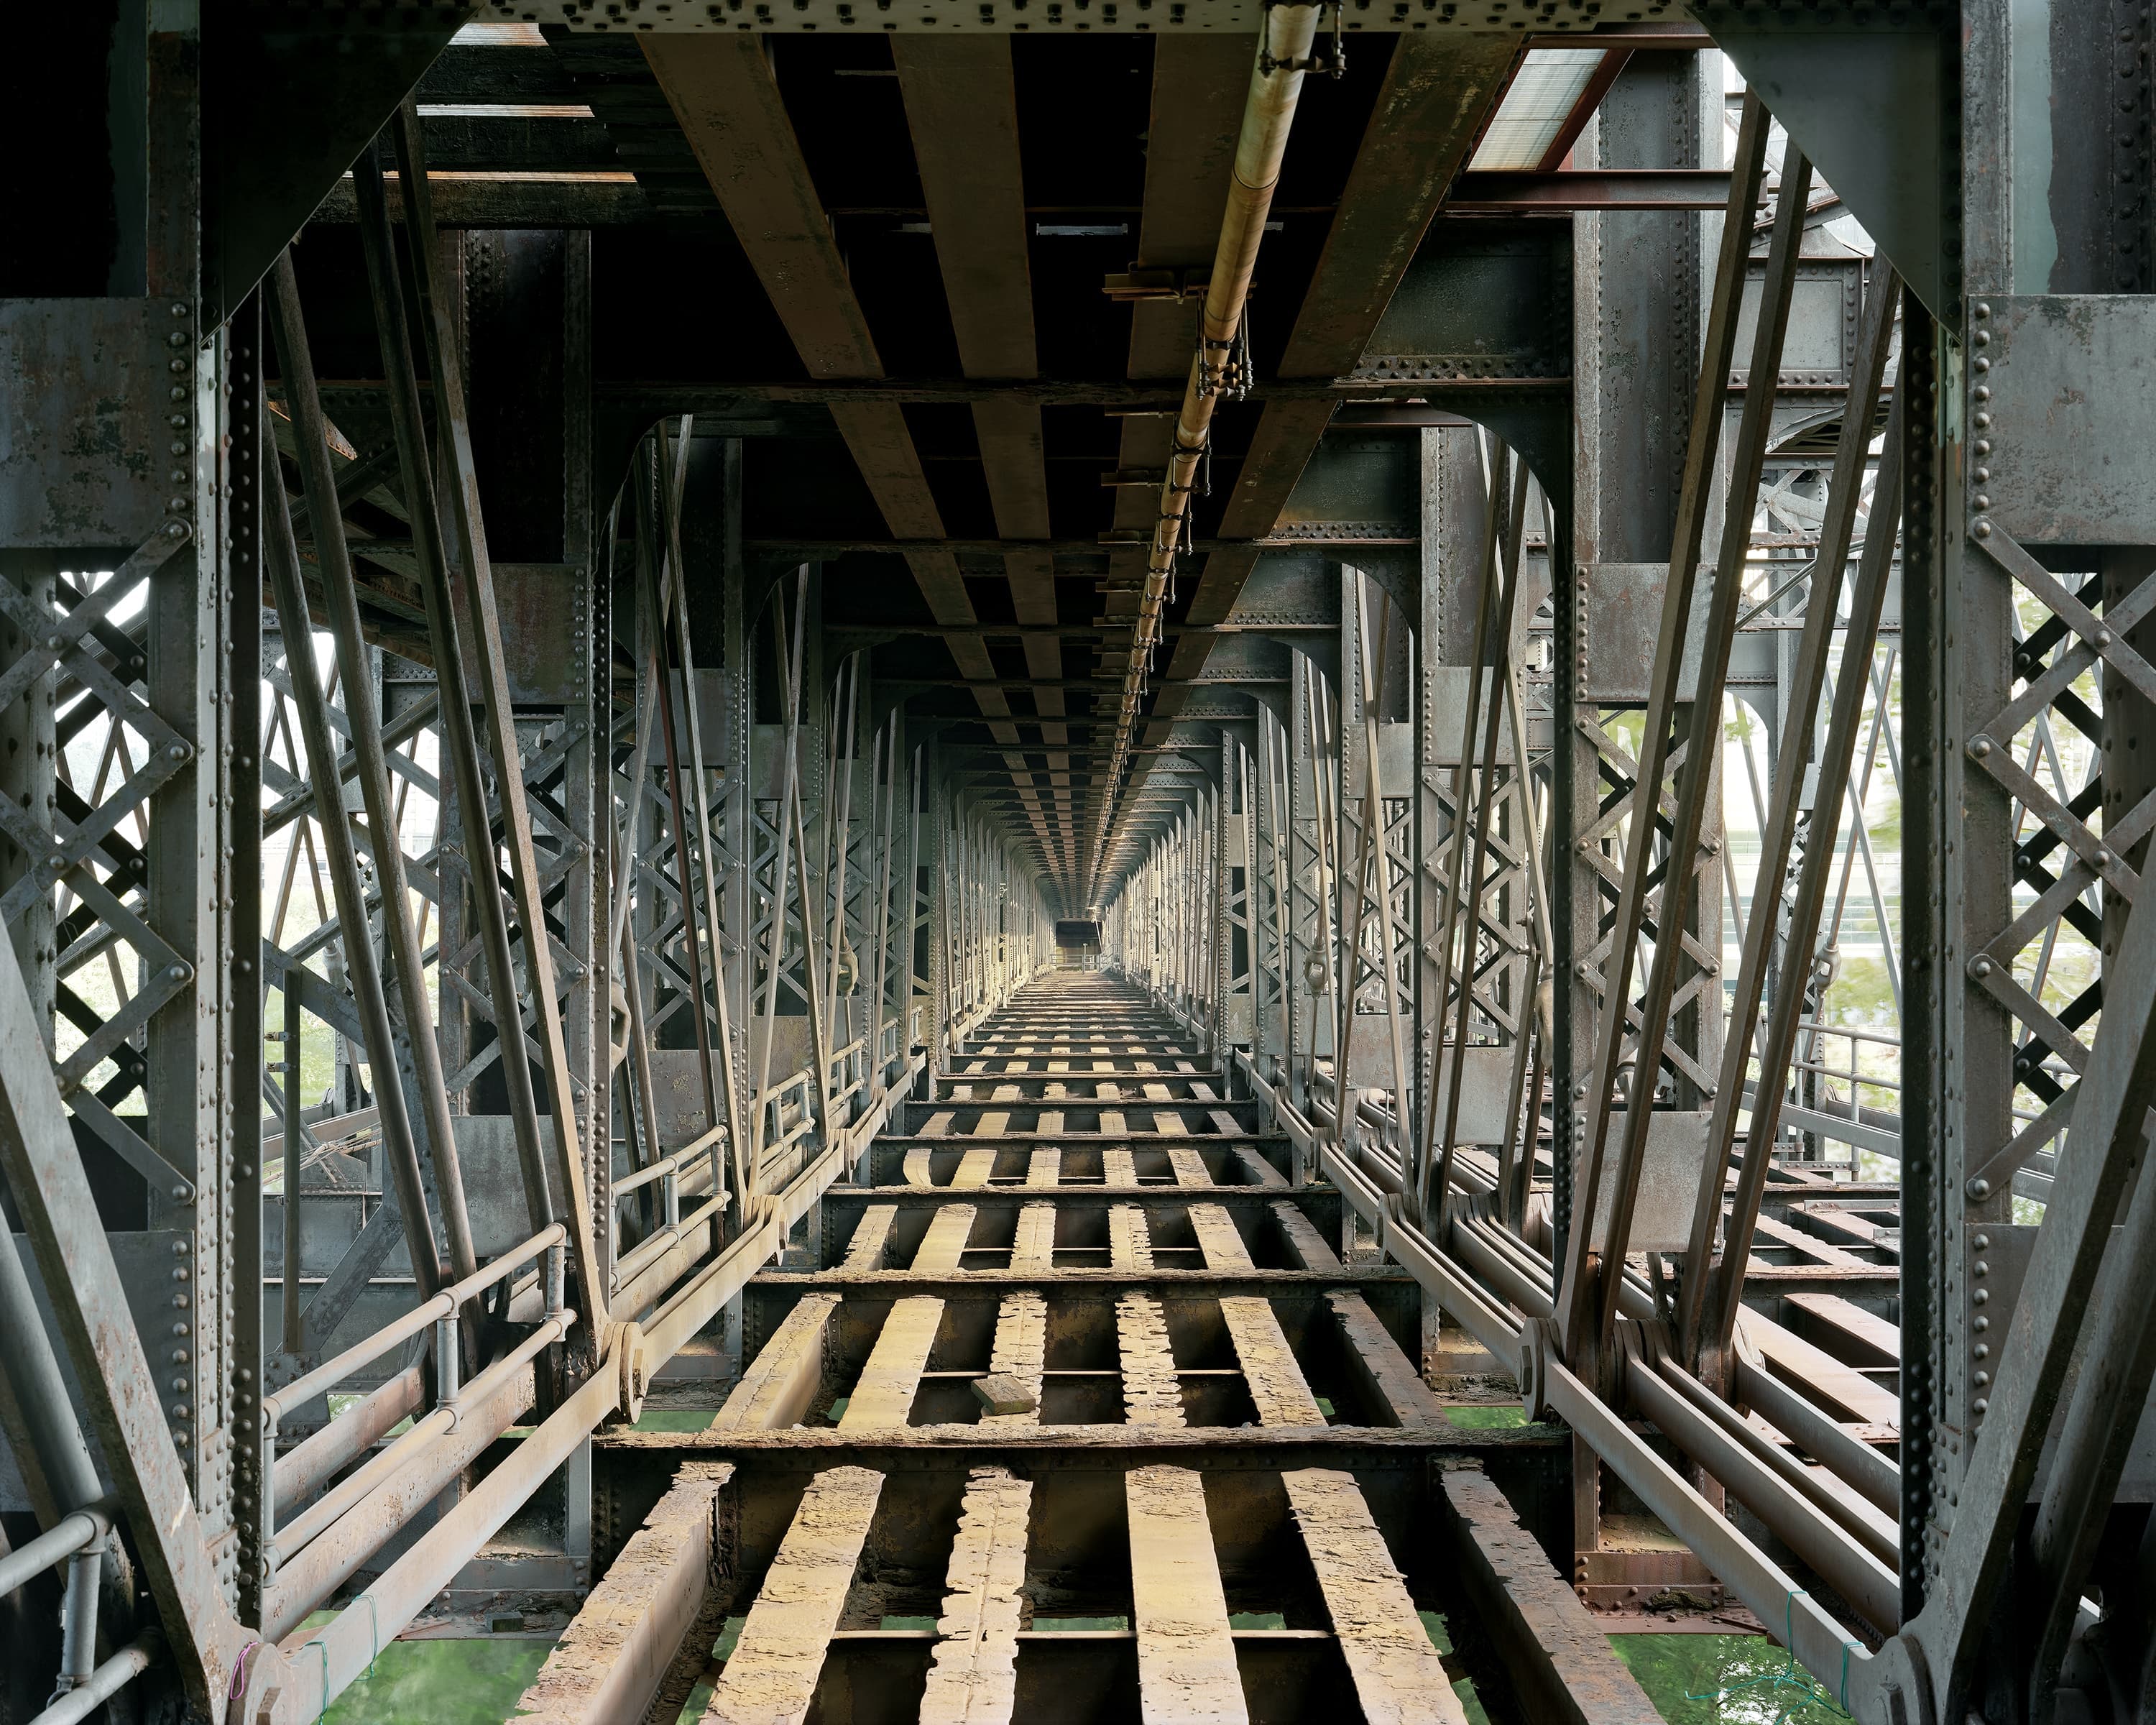 Inside the lower deck of through truss bridge over Allegheny River.